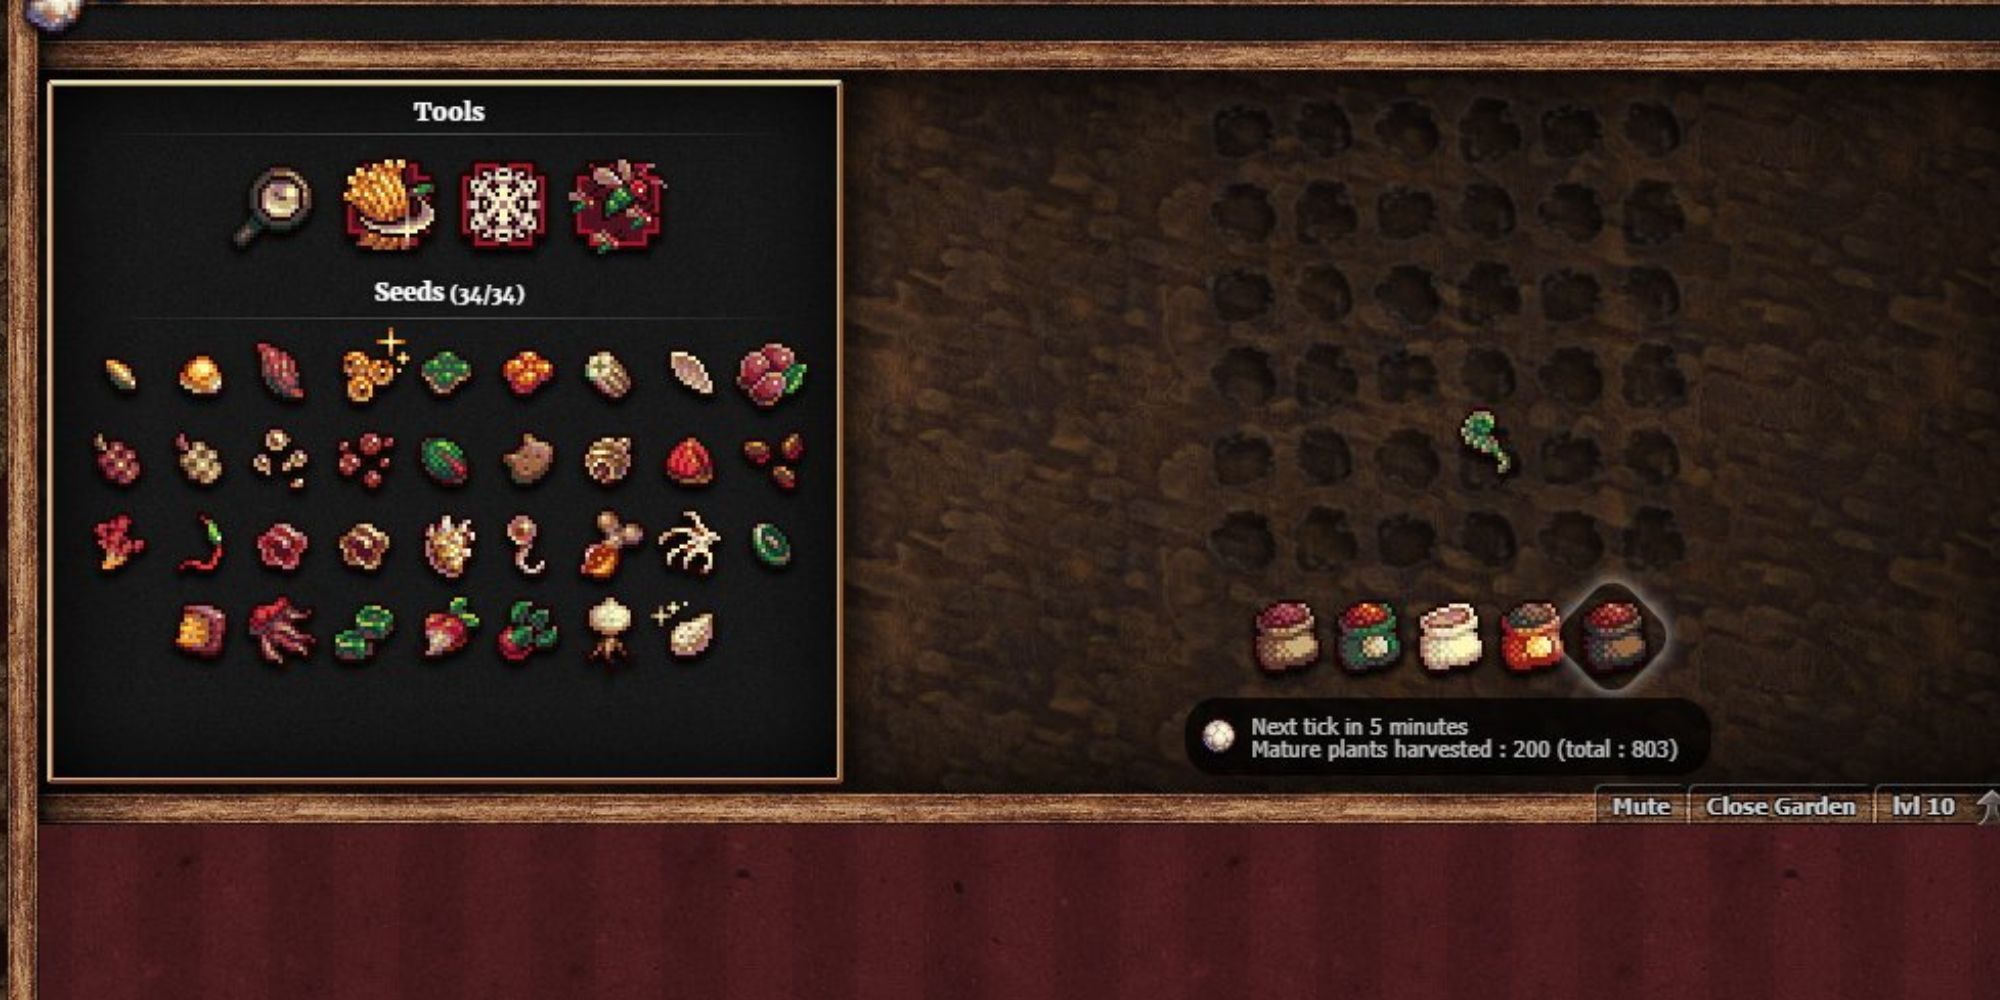 Cookie Clicker's Agriculture, Seeds, and Crops interface.